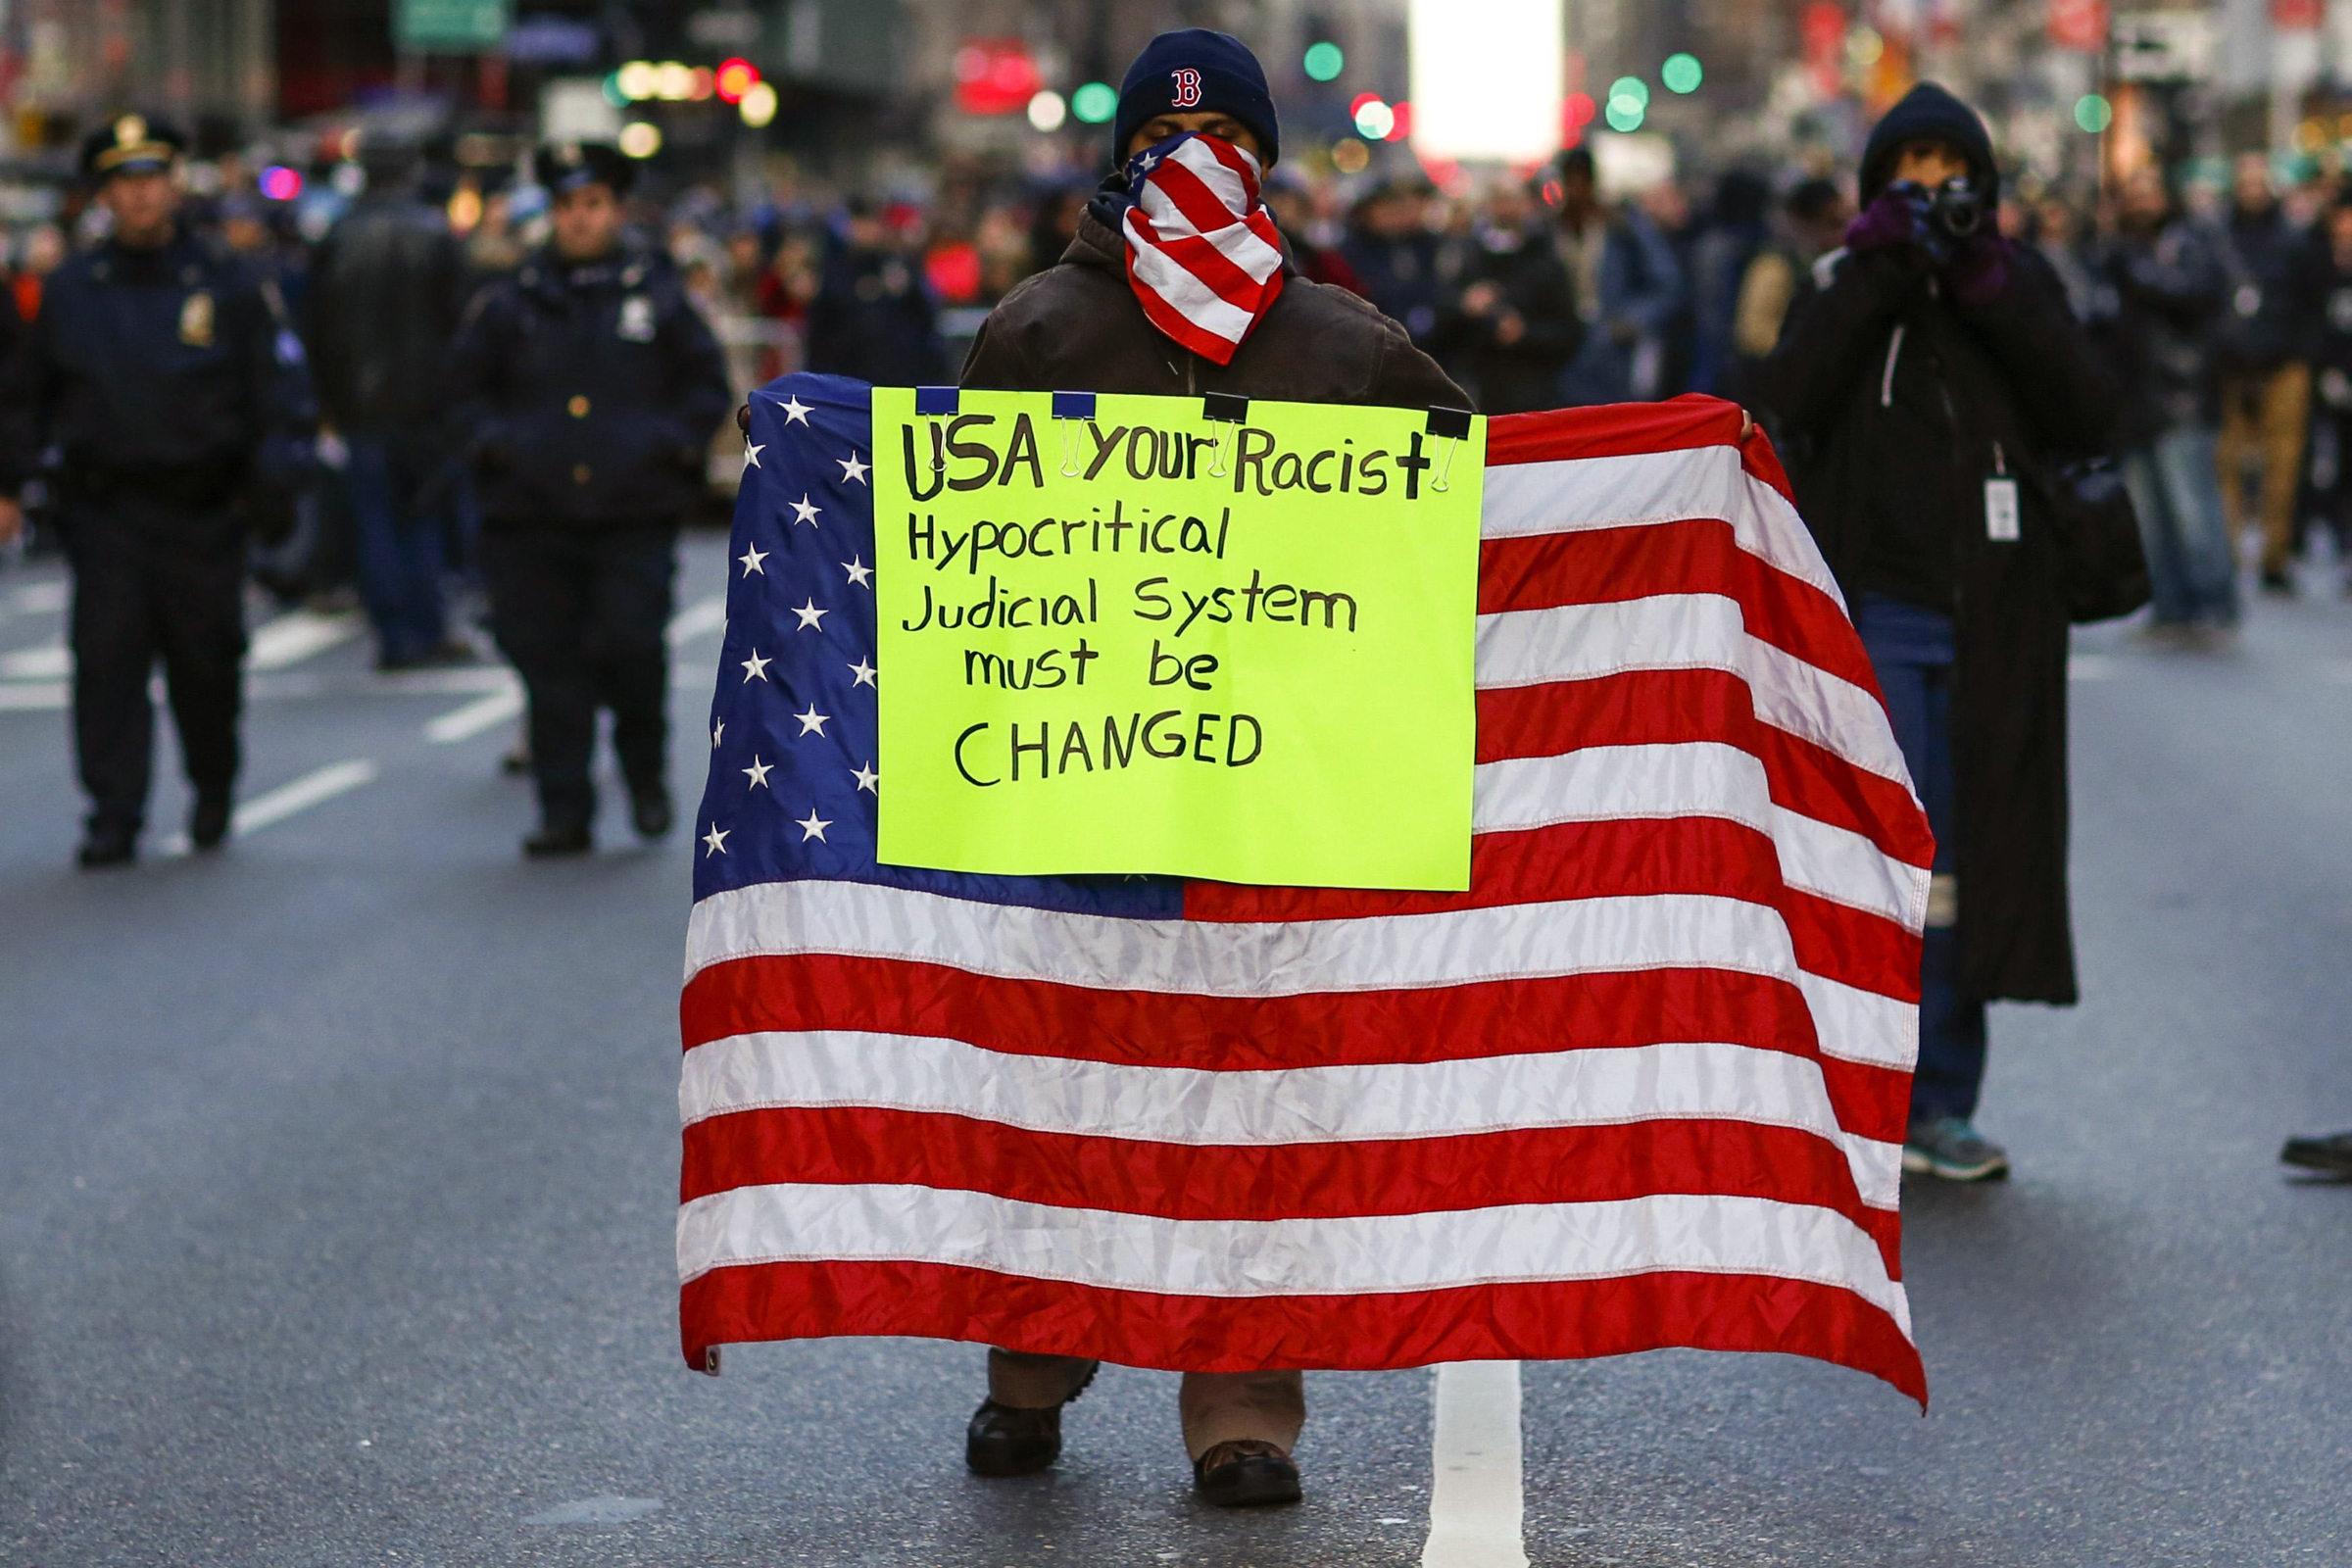 A man takes part in a march in New York Dec. 13, 2014, calling for changes in the criminal justice system. (CNS/Reuters/Eduardo Munoz)